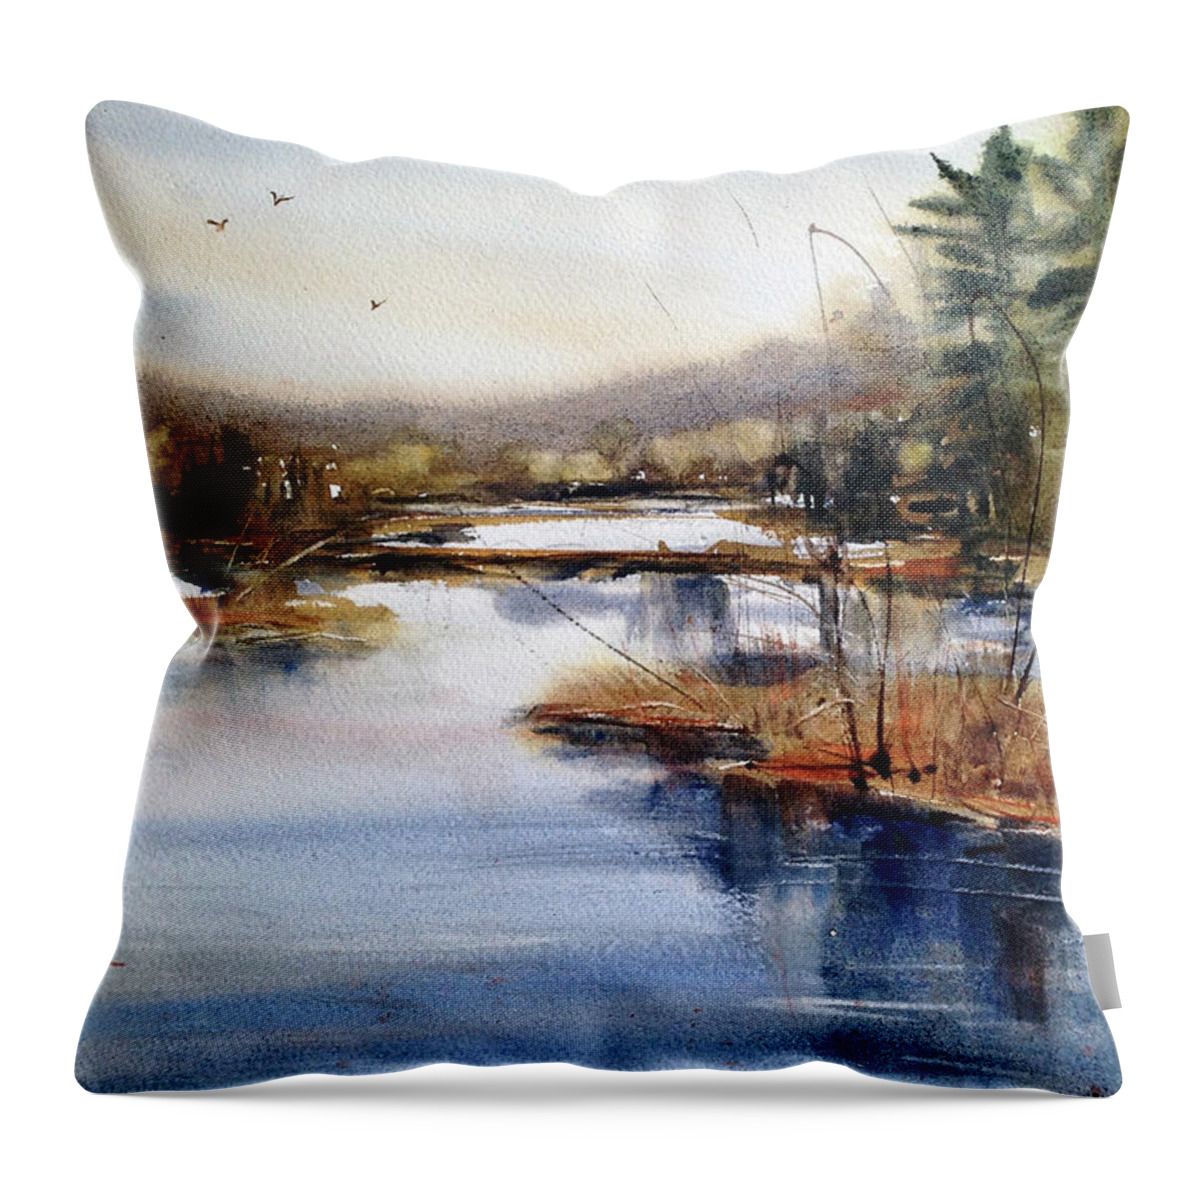 Watercolor Throw Pillow featuring the painting Where Peaceful Waters Flow by Judith Levins